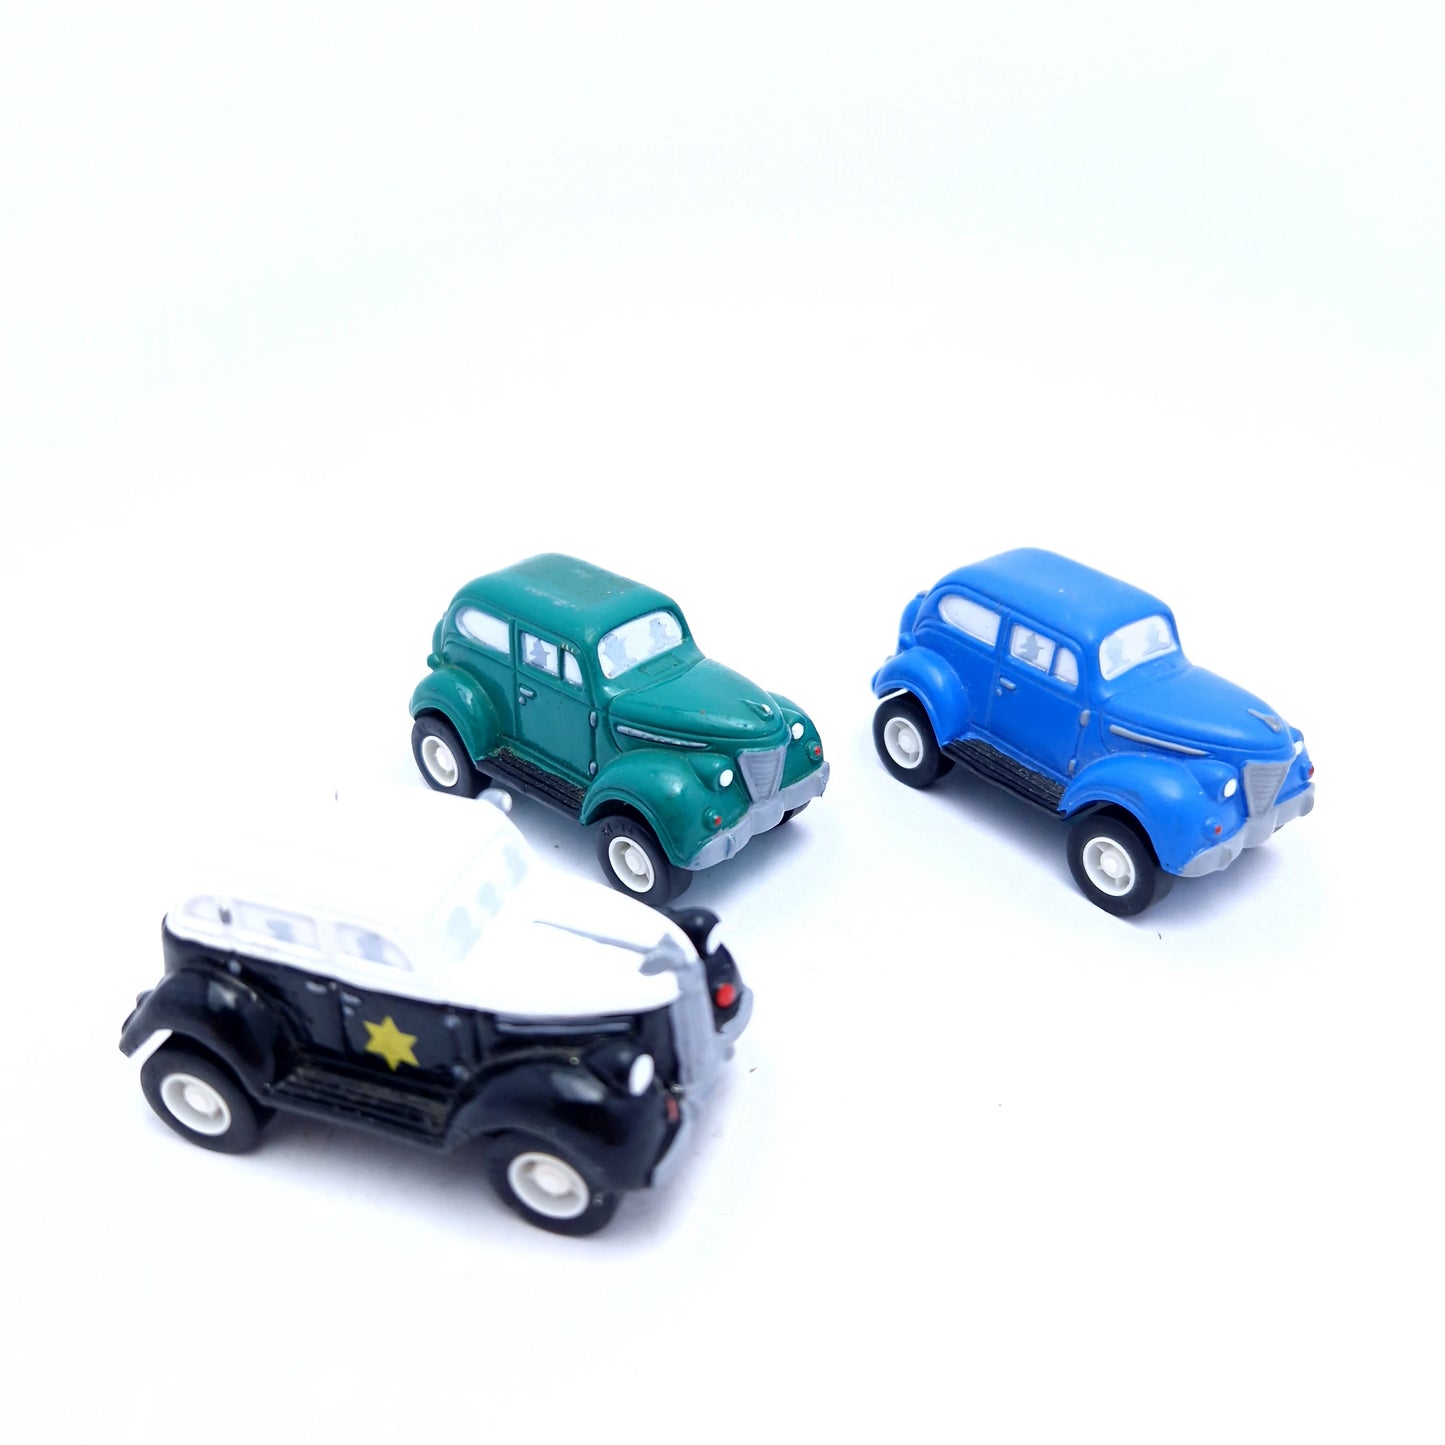 DICK TRACEY ☆ Set x3 Pull Back PVC Vehicle Cars Police Vintage ☆ Loose 1990's ERTL